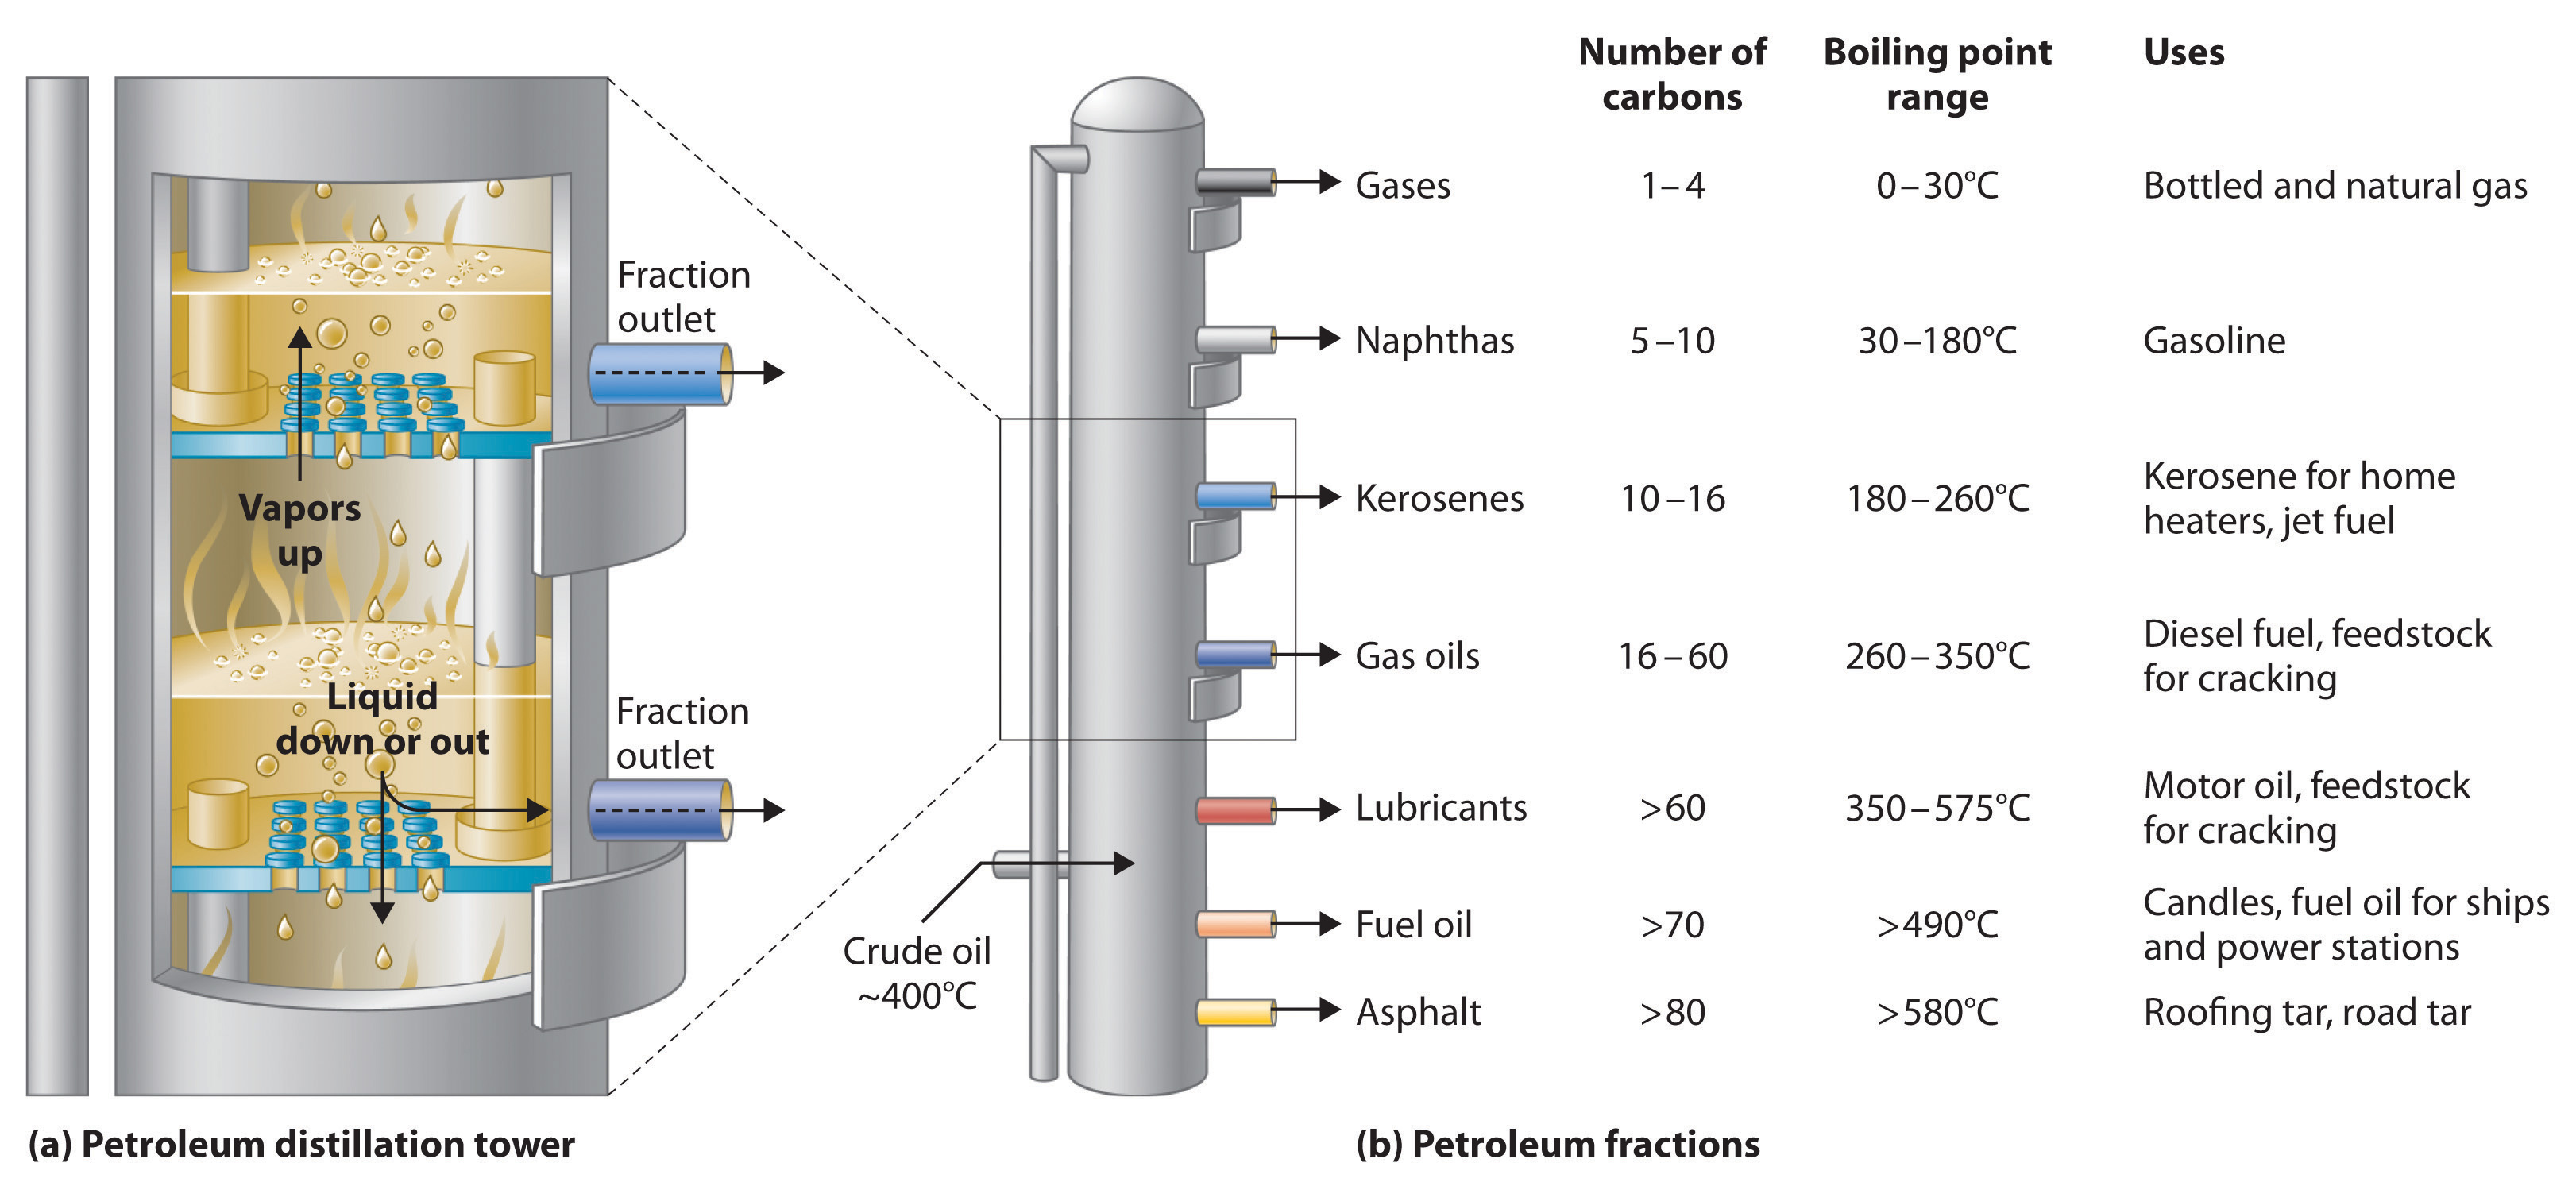 Diagram of petroleum fractions. Gases have one to four carbons, a boiling point of 0 to 30 degrees Celsius, and can be used in bottled and natural gas. Naphthas has 5 to 10 carbons, a boiling point of 30 to 180 degrees Celsius, and can be used in gasoline. Kerosenes have 10 to 16 carbons, boiling points of 180 to 260 degrees Celsius, and can be used as kerosene for home heaters and jet fuel. Gas oils have 16 to 60 carbons, boiling points of 260 to 350 degrees Celsius, and can be used in diesel fuel and feedstock for cracking. Lubricants have more than 60 carbons, boiling points of 350 to 575 degrees Celsius, and can be used in motor oil and feedstock for cracking. Fuel oil have more than 70 carbons, boiling points of over 490 degrees Celsius, and can be used in candles, fuel oil for ships, and power stations. Asphalt has more than 80 carbons, boiling points of more than 580 degrees Celsius, and can be used in roofing and road tar.